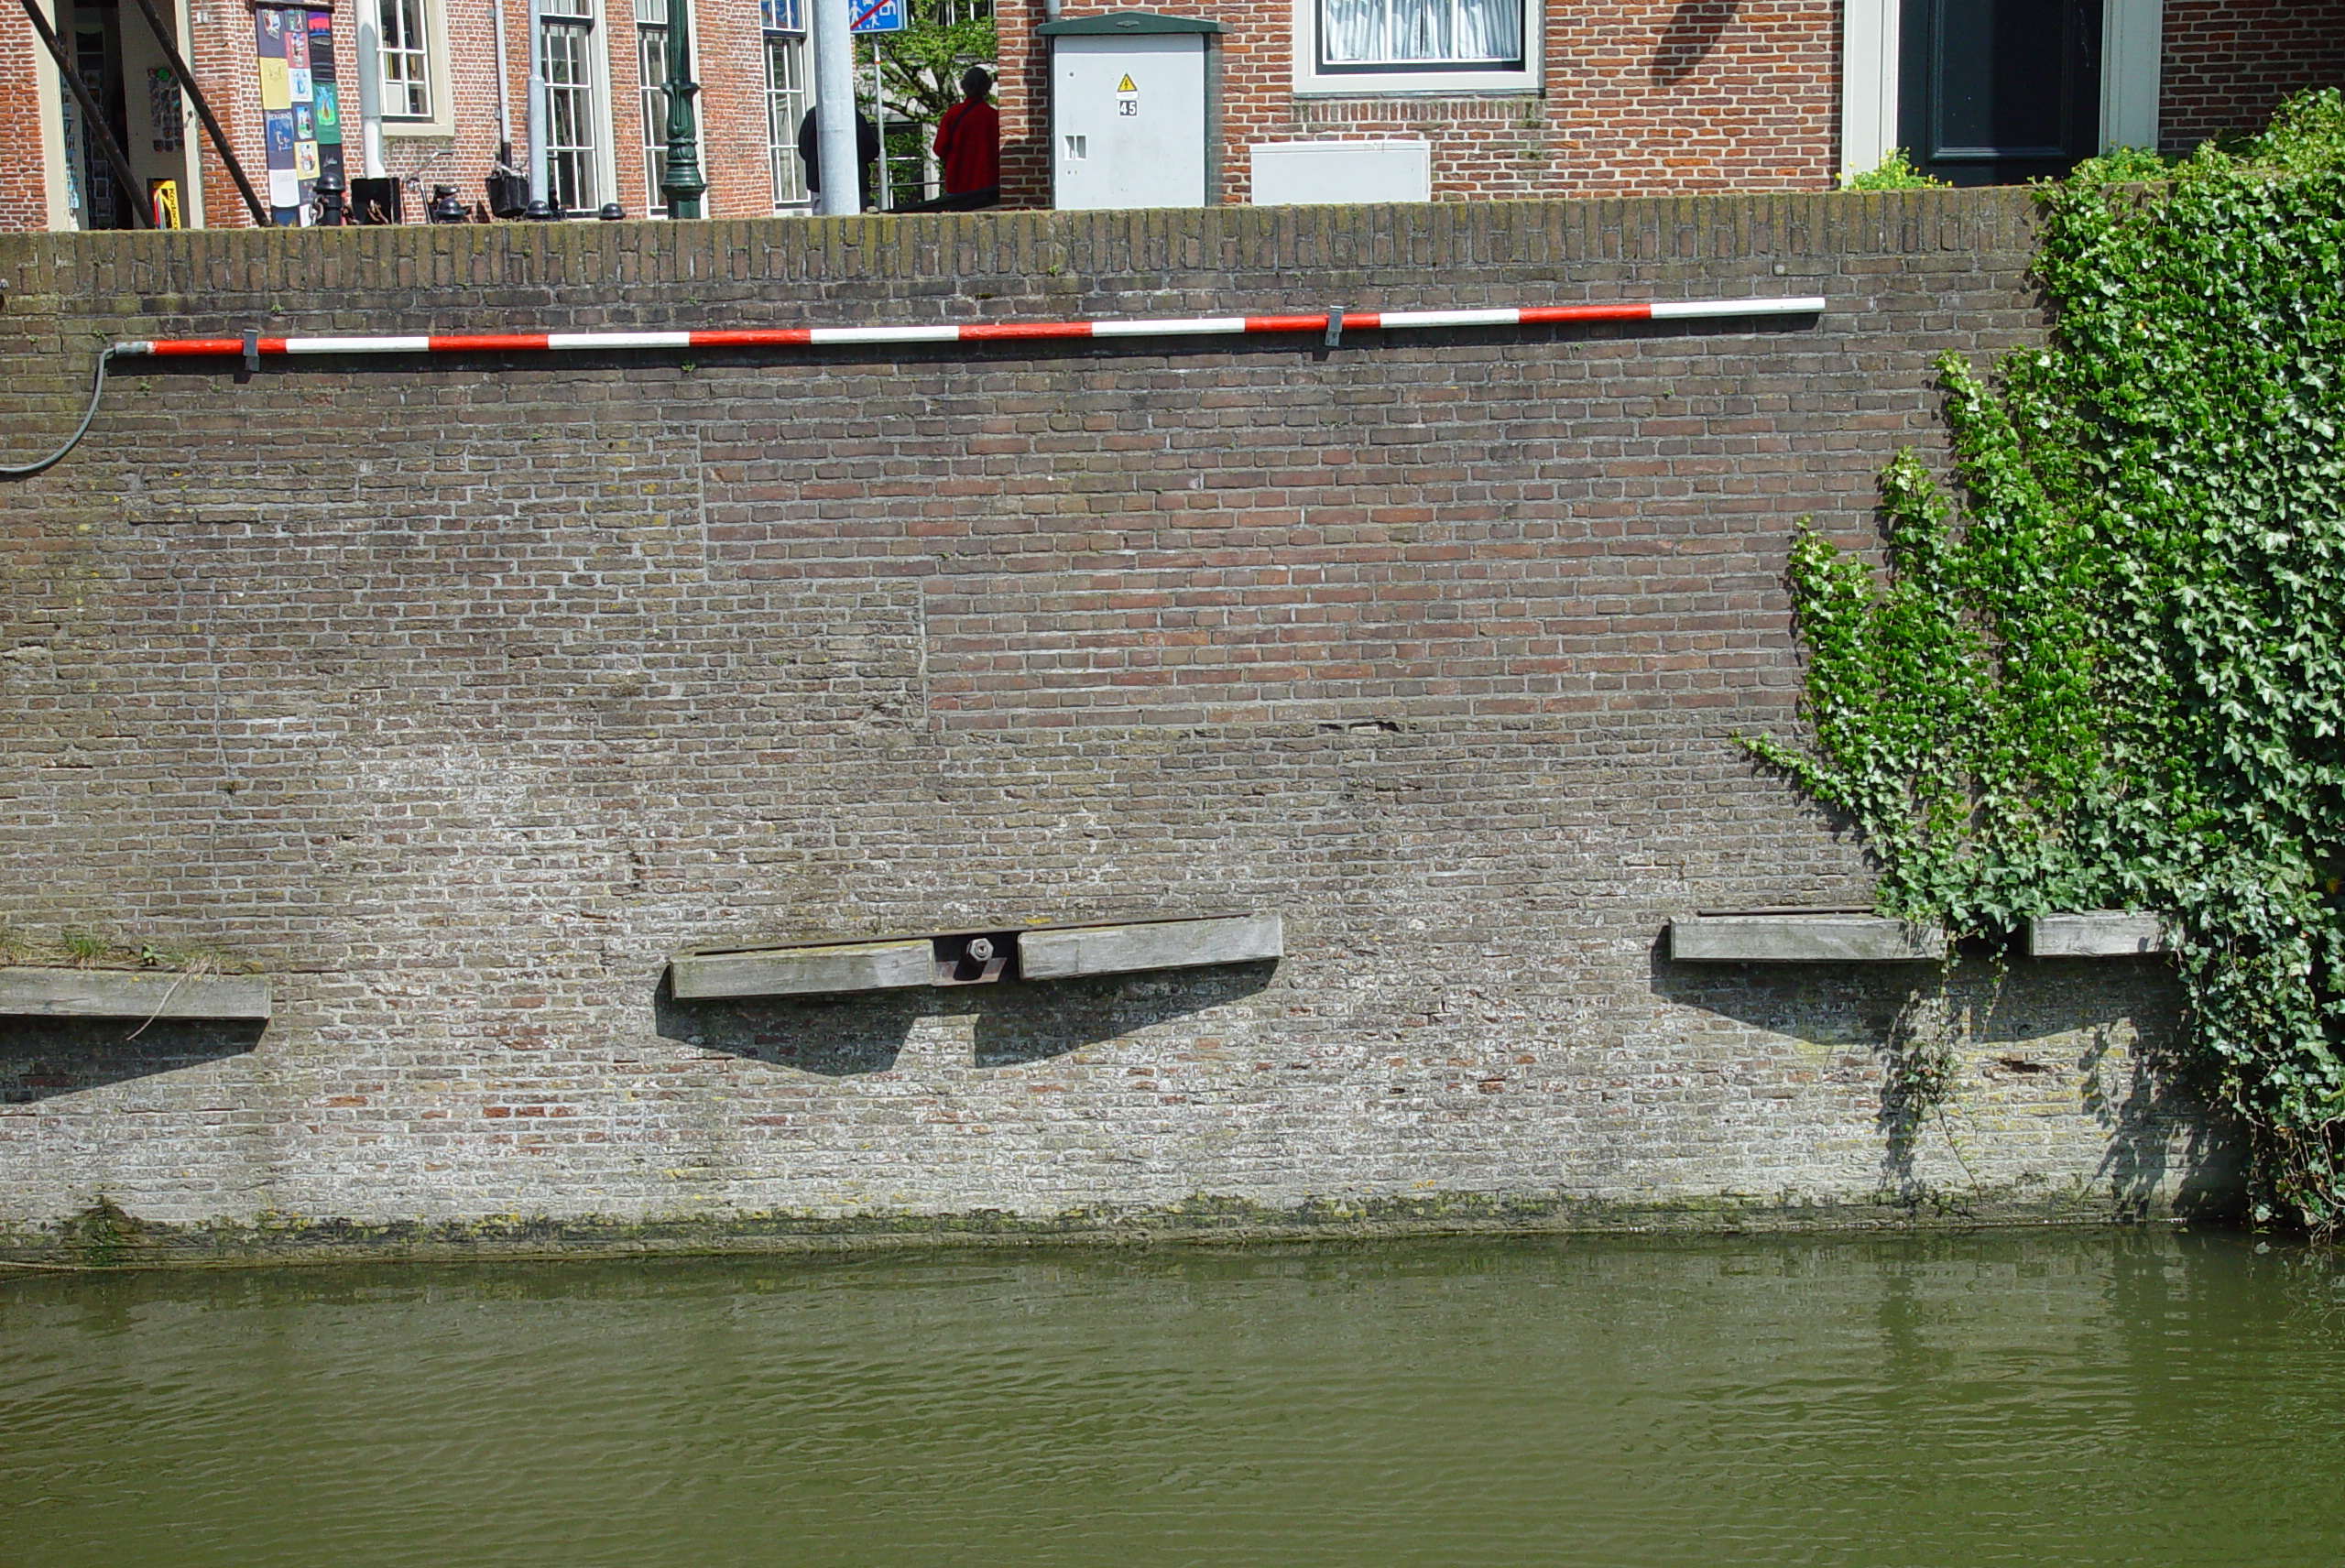 textures walls brick brickwall wood pole overgrown ivy wharf quay water canal amsterdam river